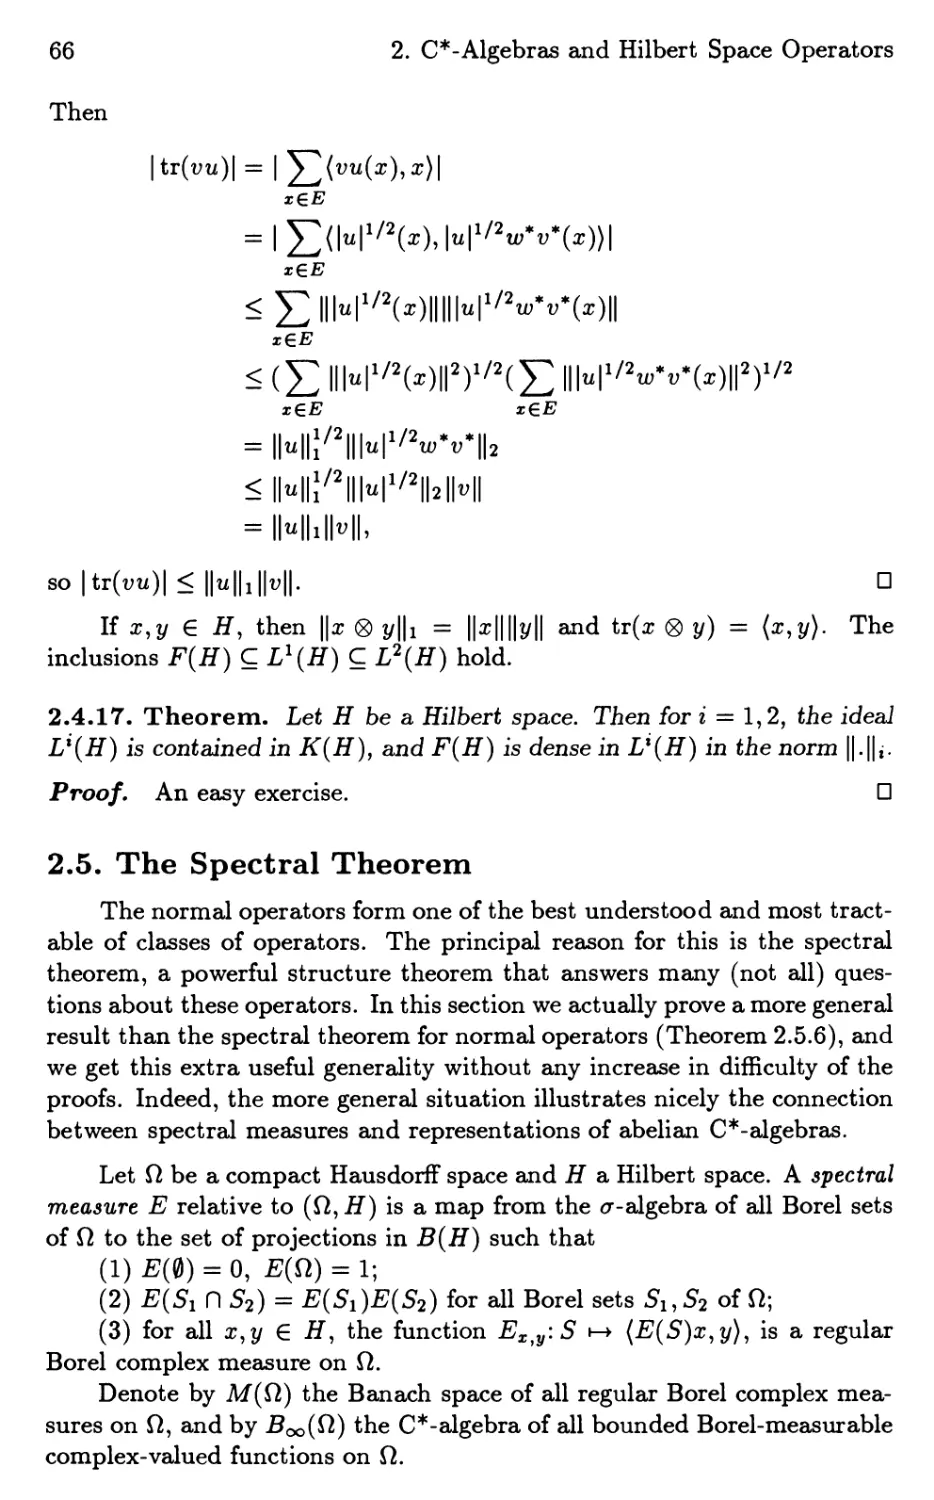 2.5. The Spectral Theorem